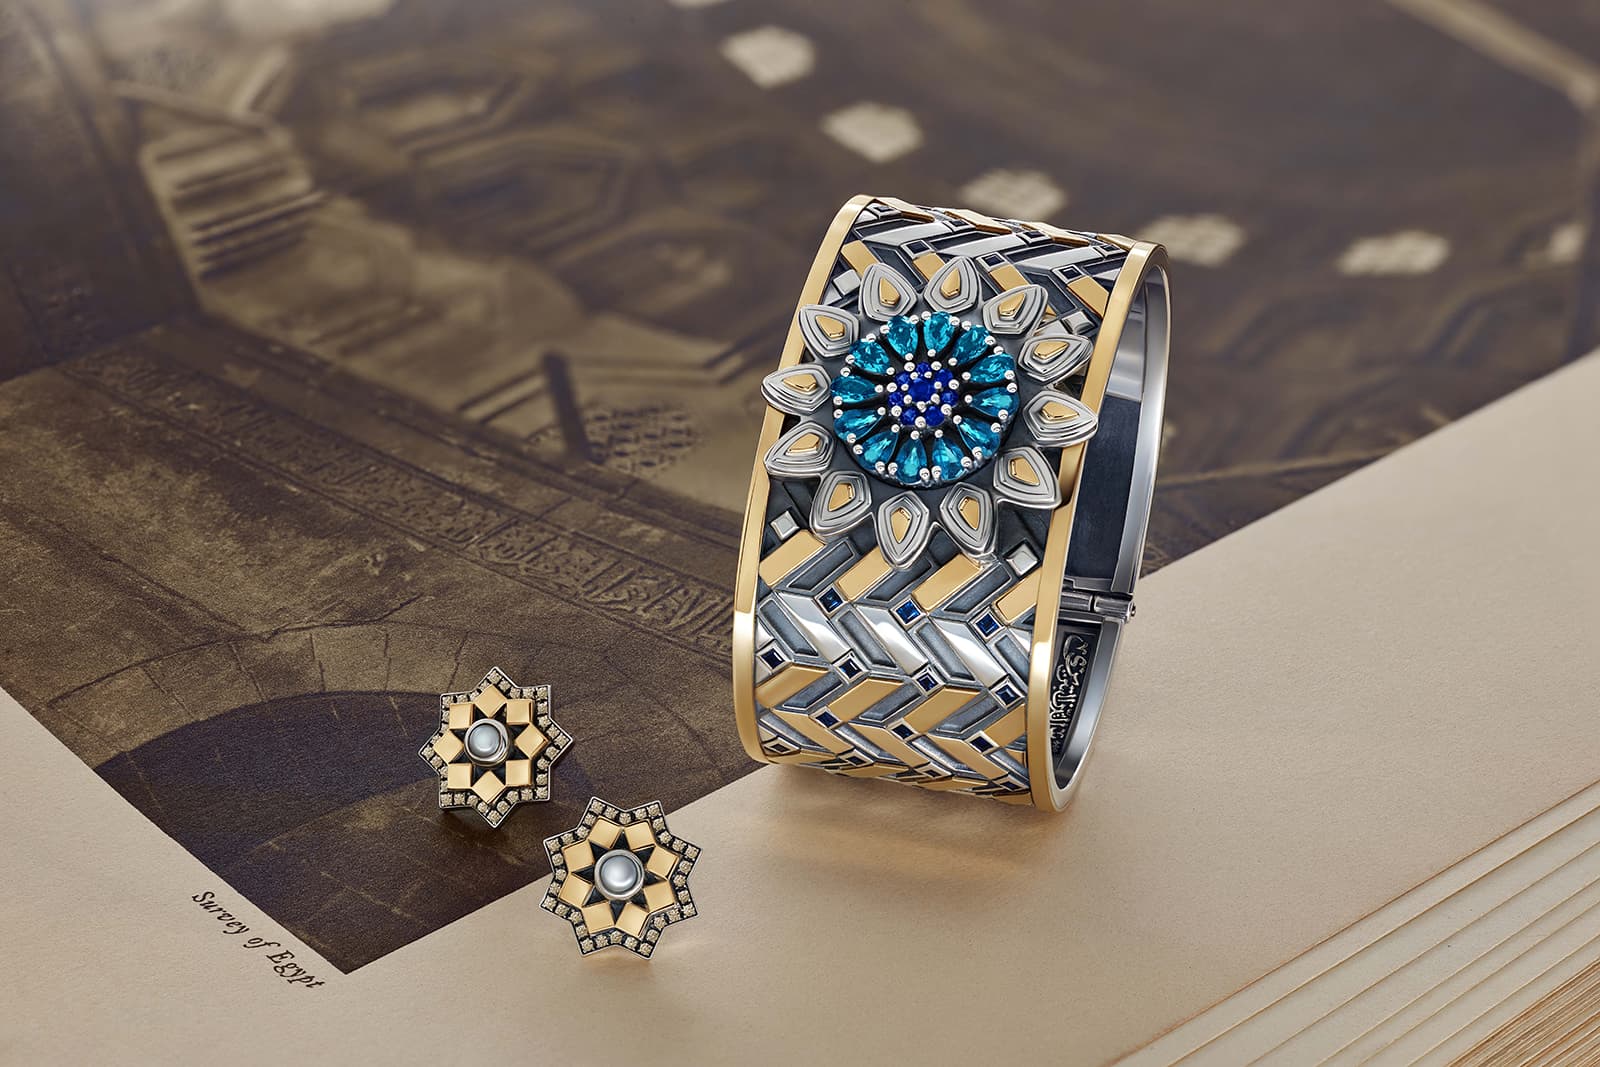 Azza Fahmy 'Mamluk' collection 'Qalawun Muzhir' cuff with sapphires and topaz and ‘Qalawun’ earrings with diamonds and pearls, both in yellow gold and sterling silver